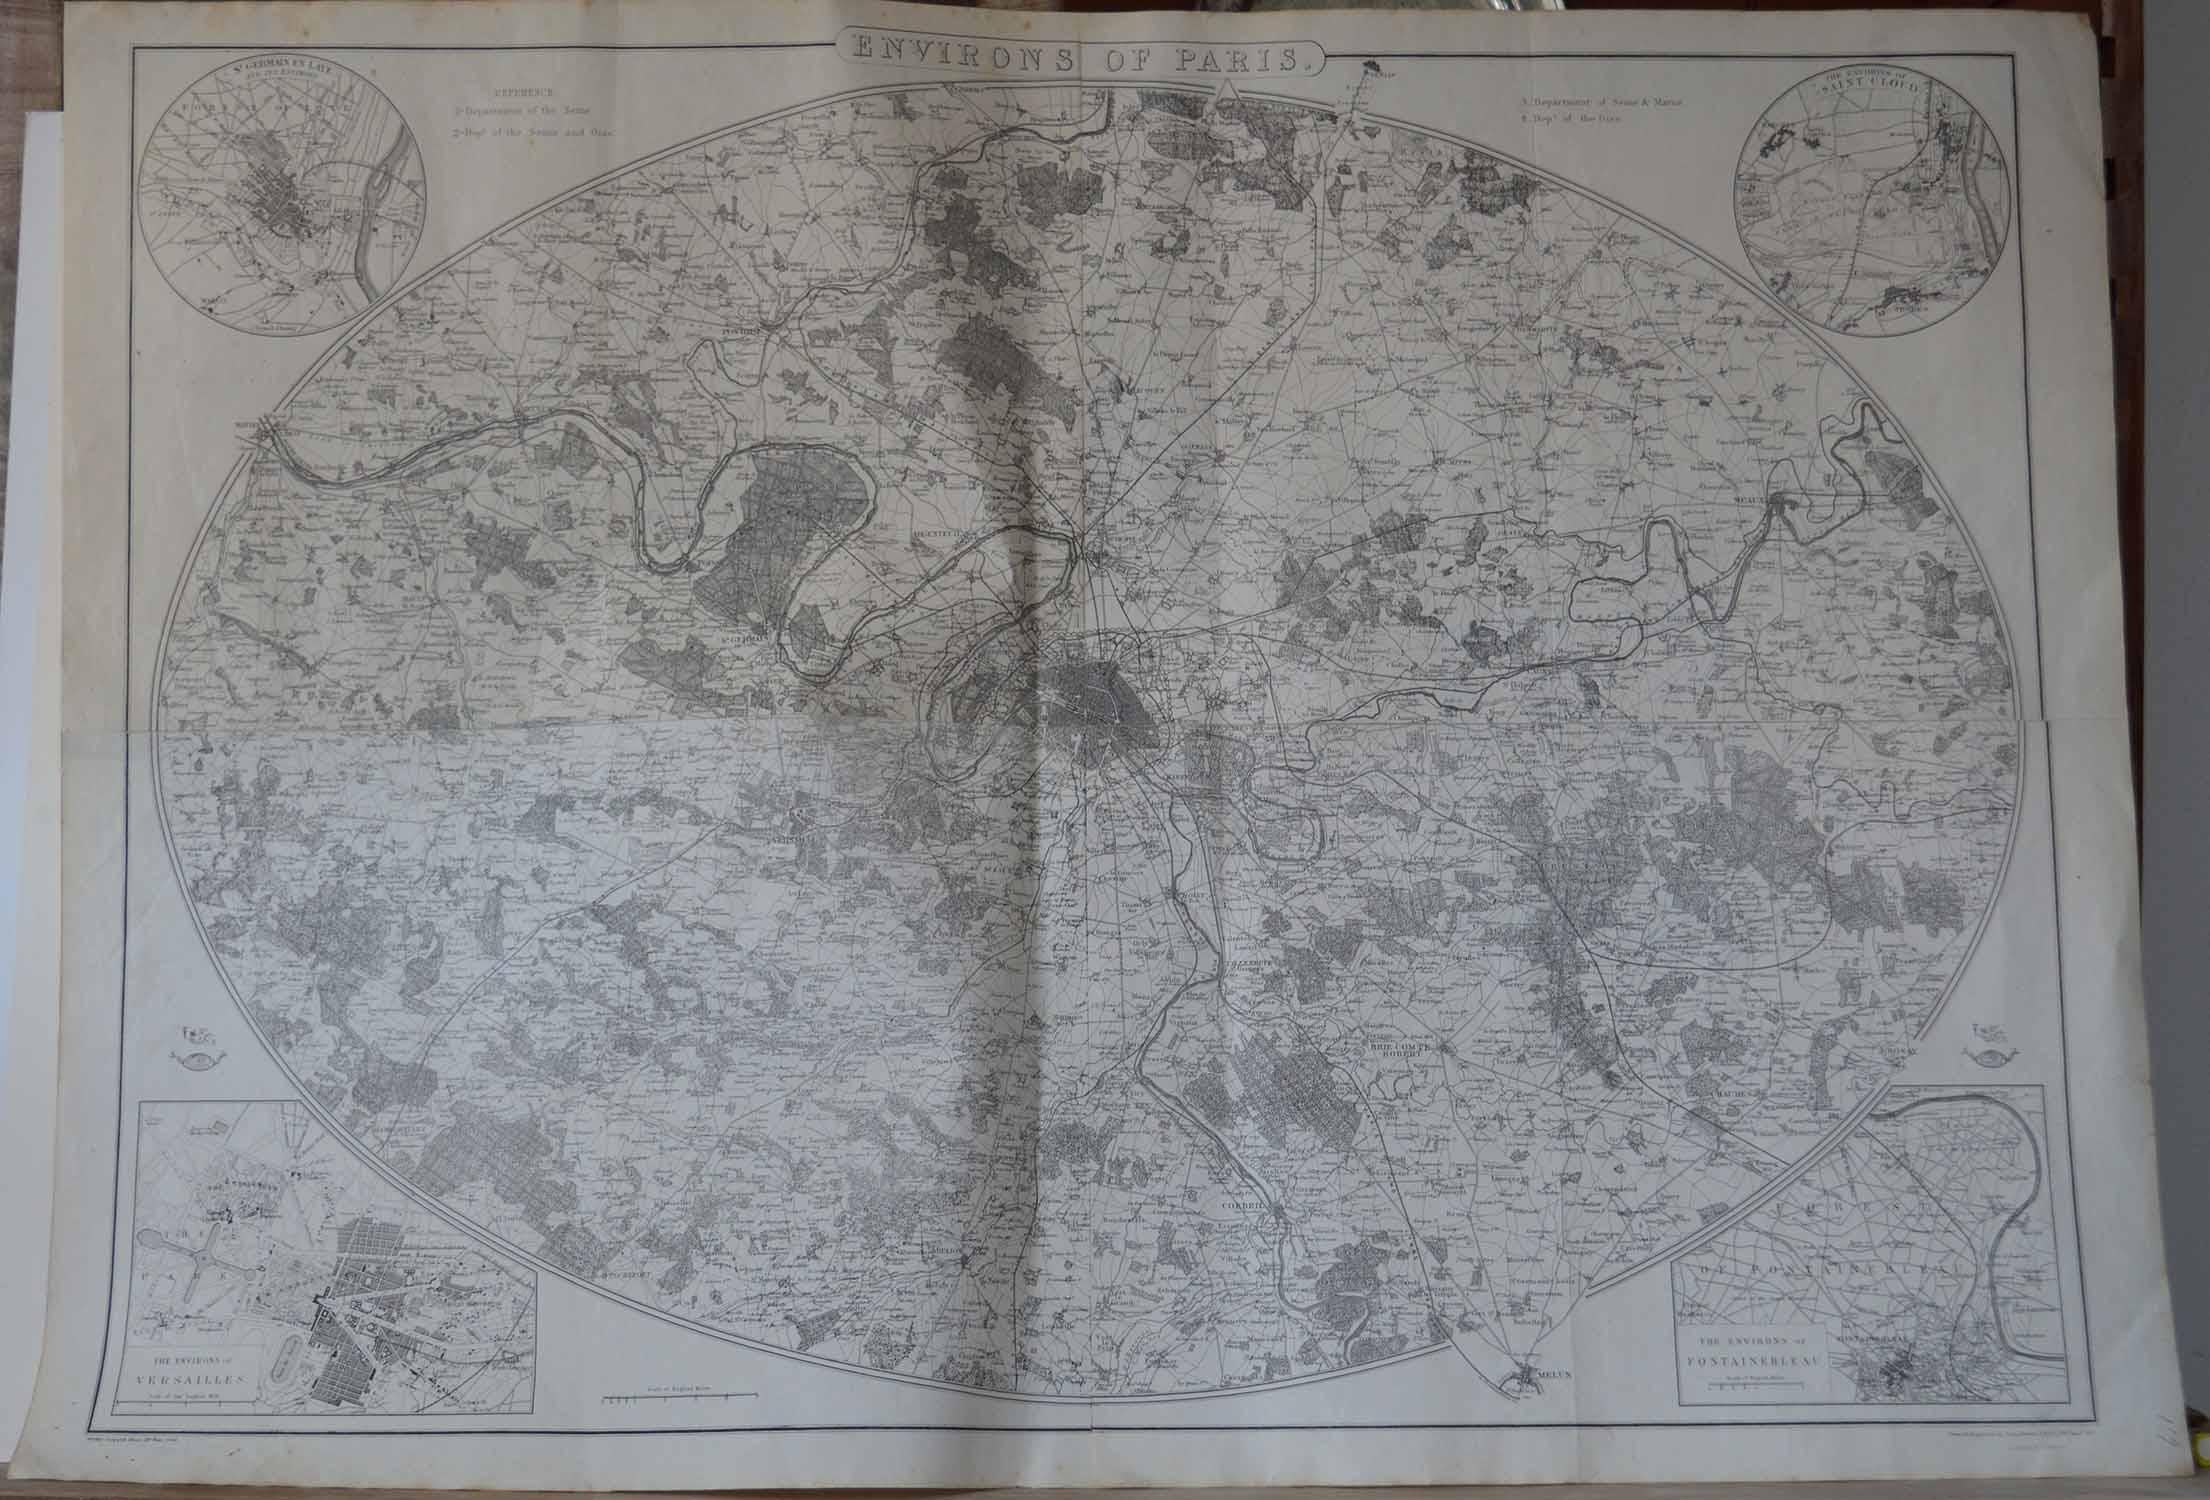 Fabulous monochrome map of Paris.

Vignettes of St Germain En Laye, Saint Cloud, Versailles and Fontainbleau.

Unframed.

Drawn by J.Dower.

Lithography by Weller. 4 sheets joined together.

Published, 1861

Good condition. No